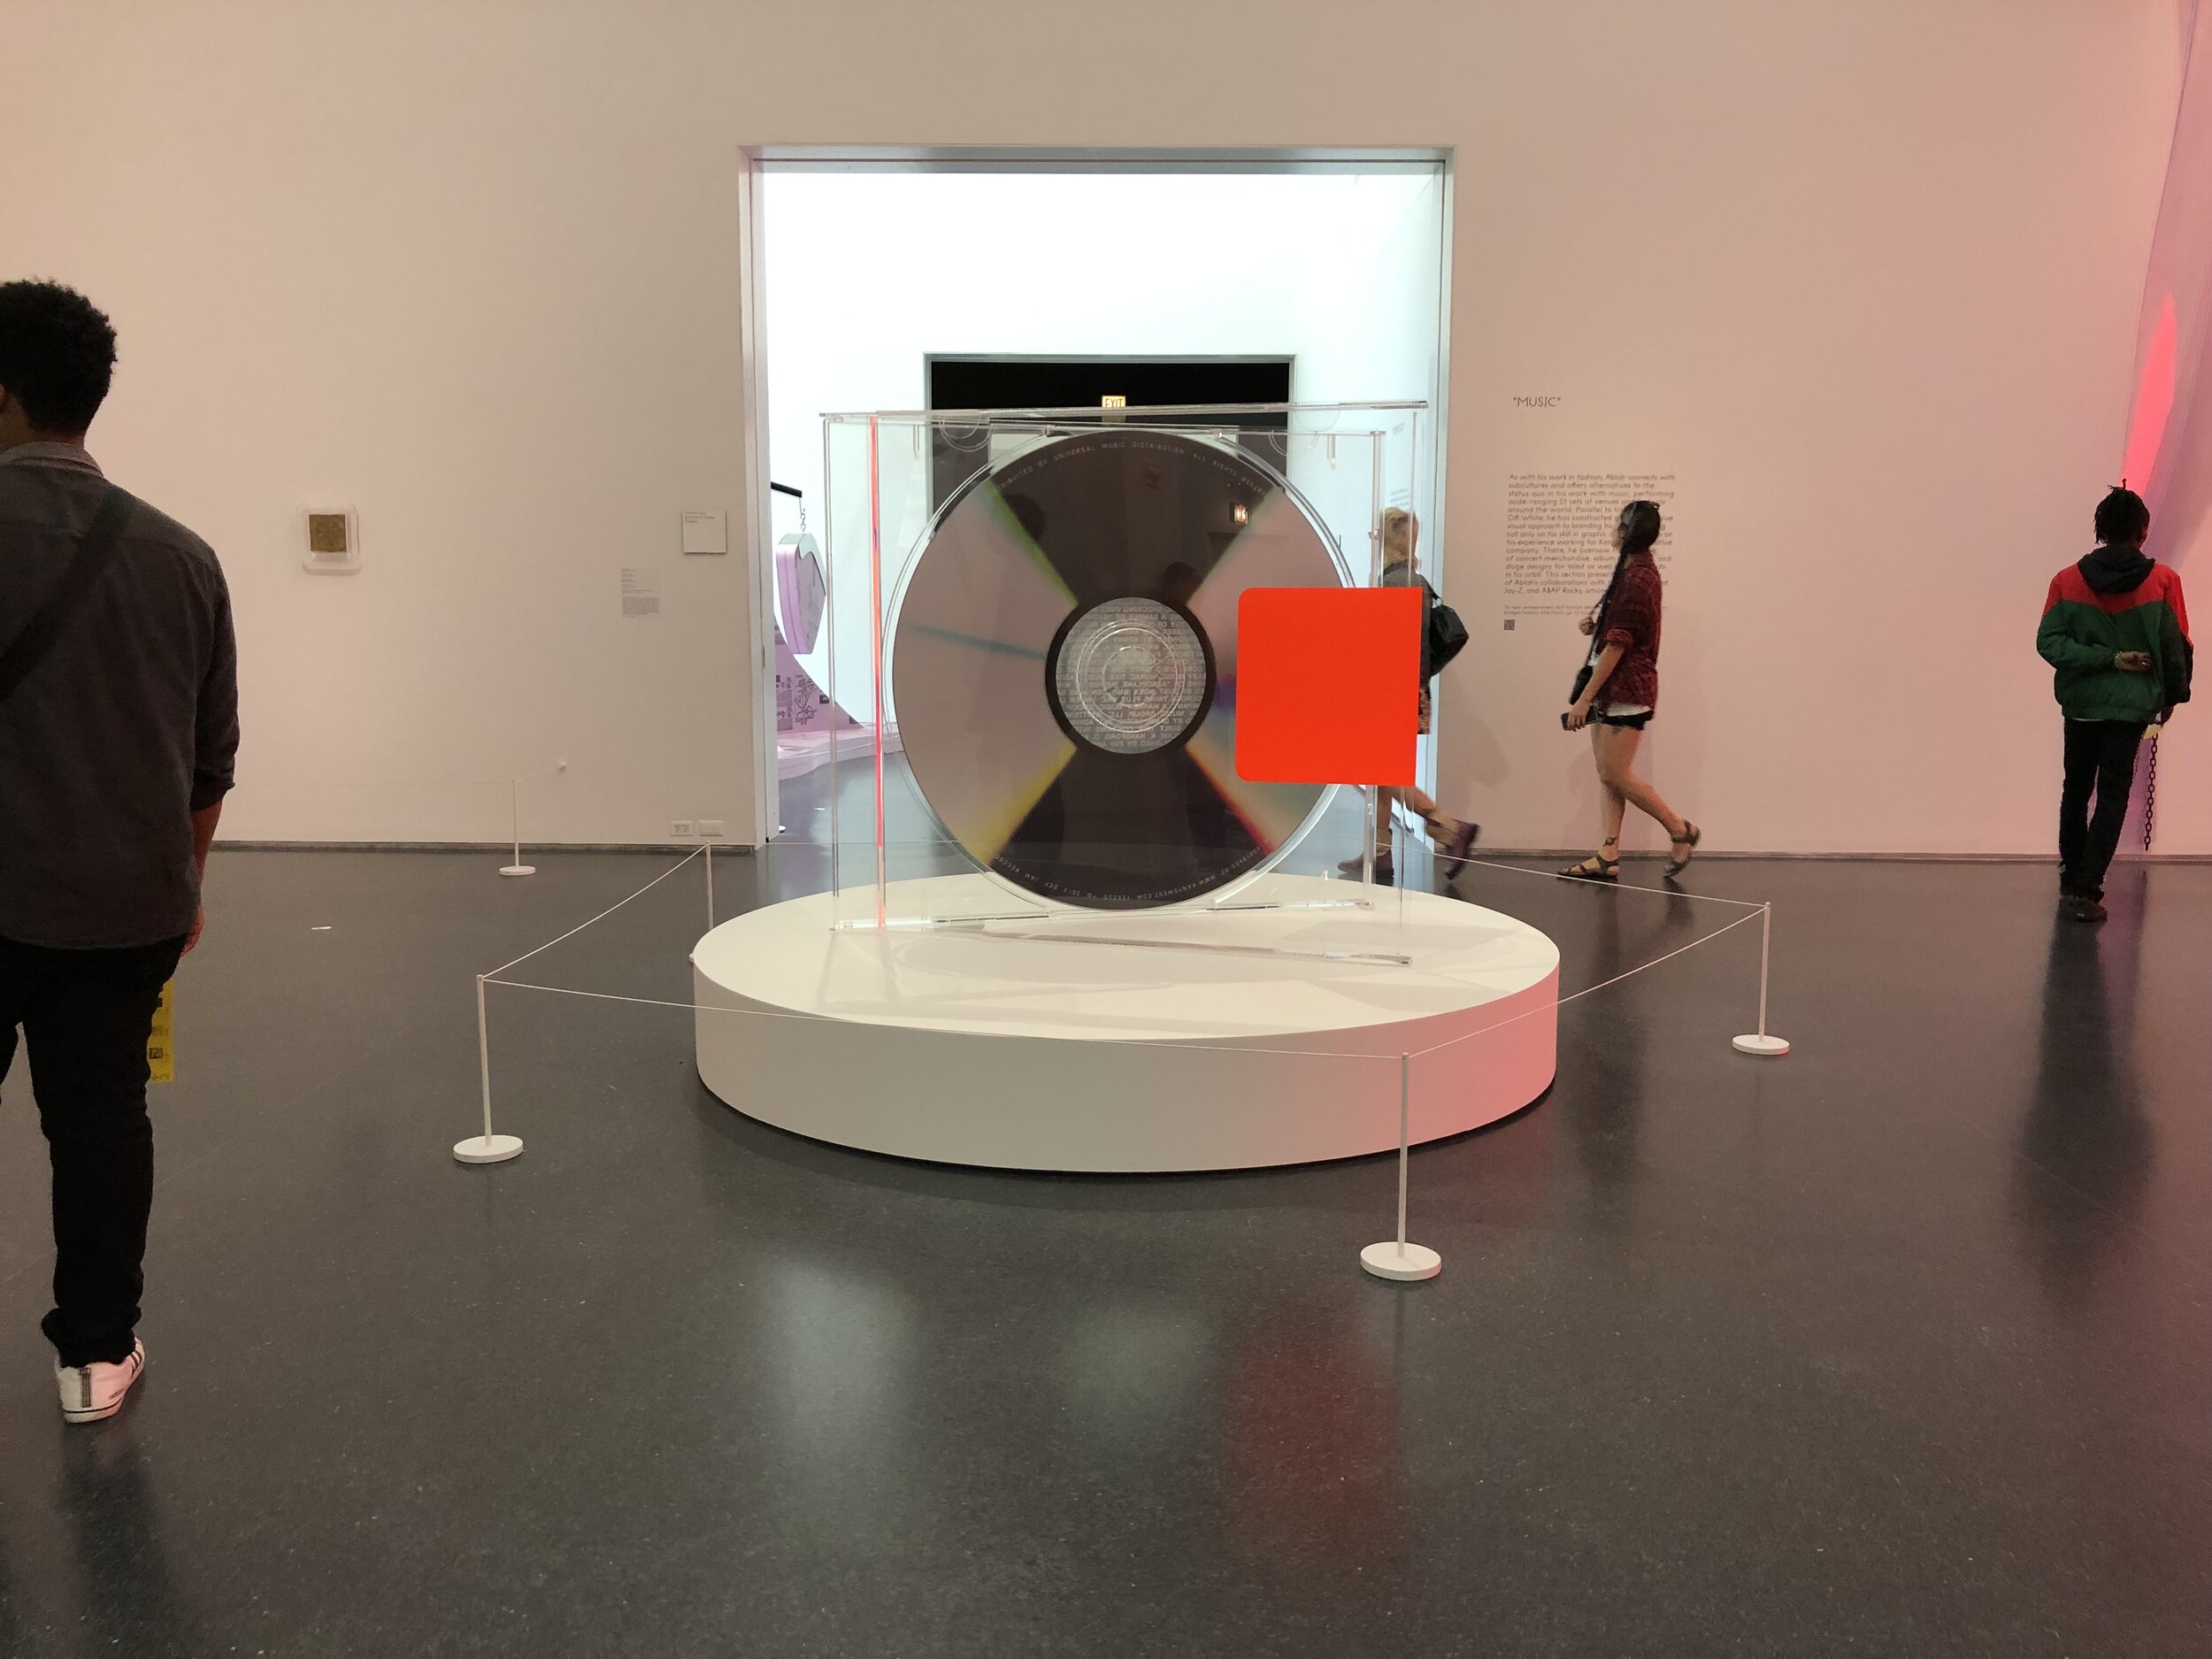  A lifesize version of Kanye West’s 6th album ‘Yeezus’ in the “Music” room. Virgil used to DJ at a young age, from high school to college house parties and after gaining notoriety in the industry his audience became more high profile. 